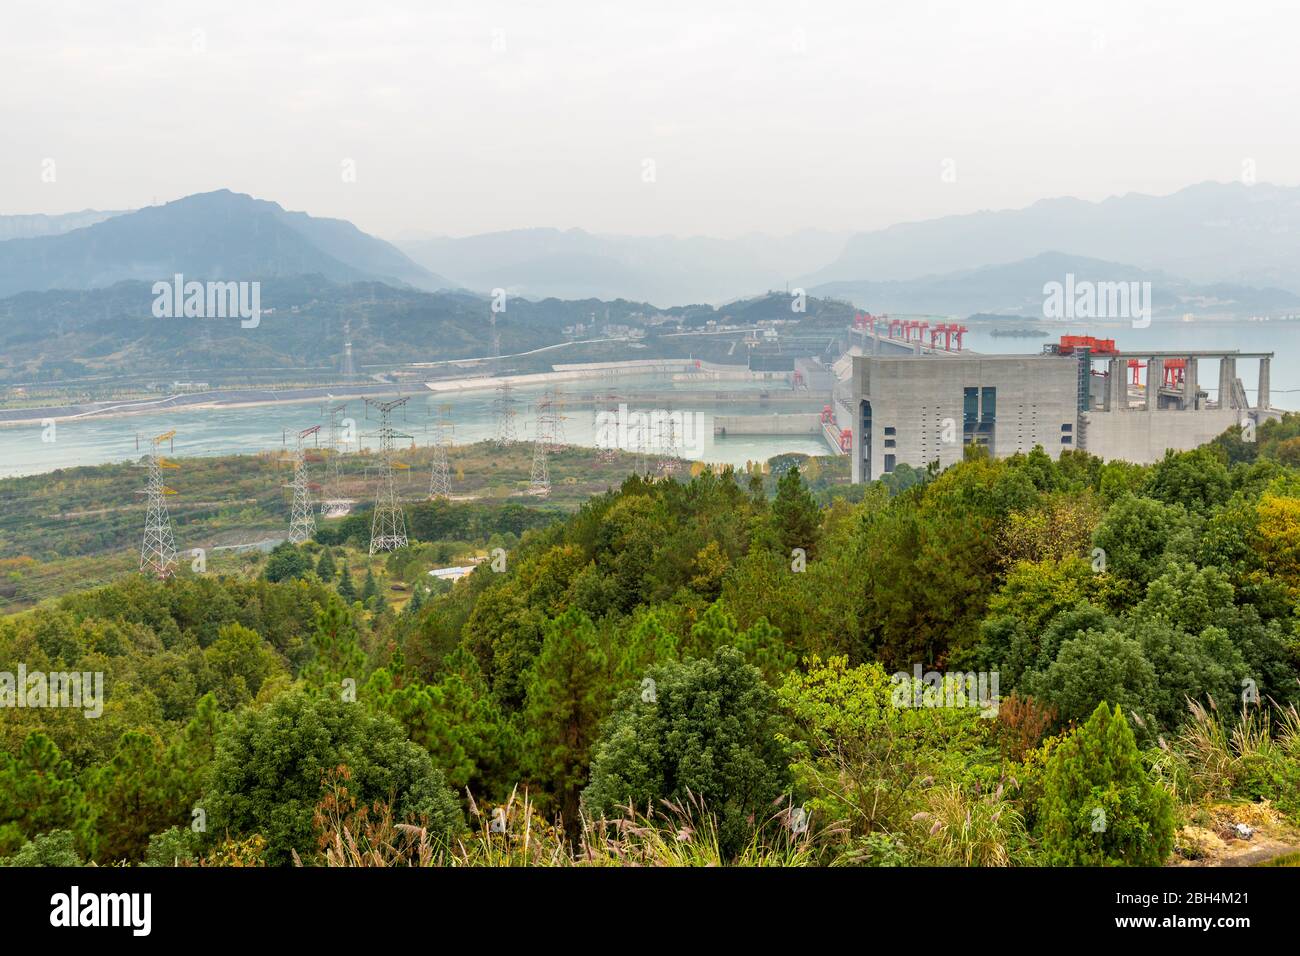 View of The Three Gorges Dam and visitors centre at Sandouping, Sandouping, Hubei, China, Asia Stock Photo